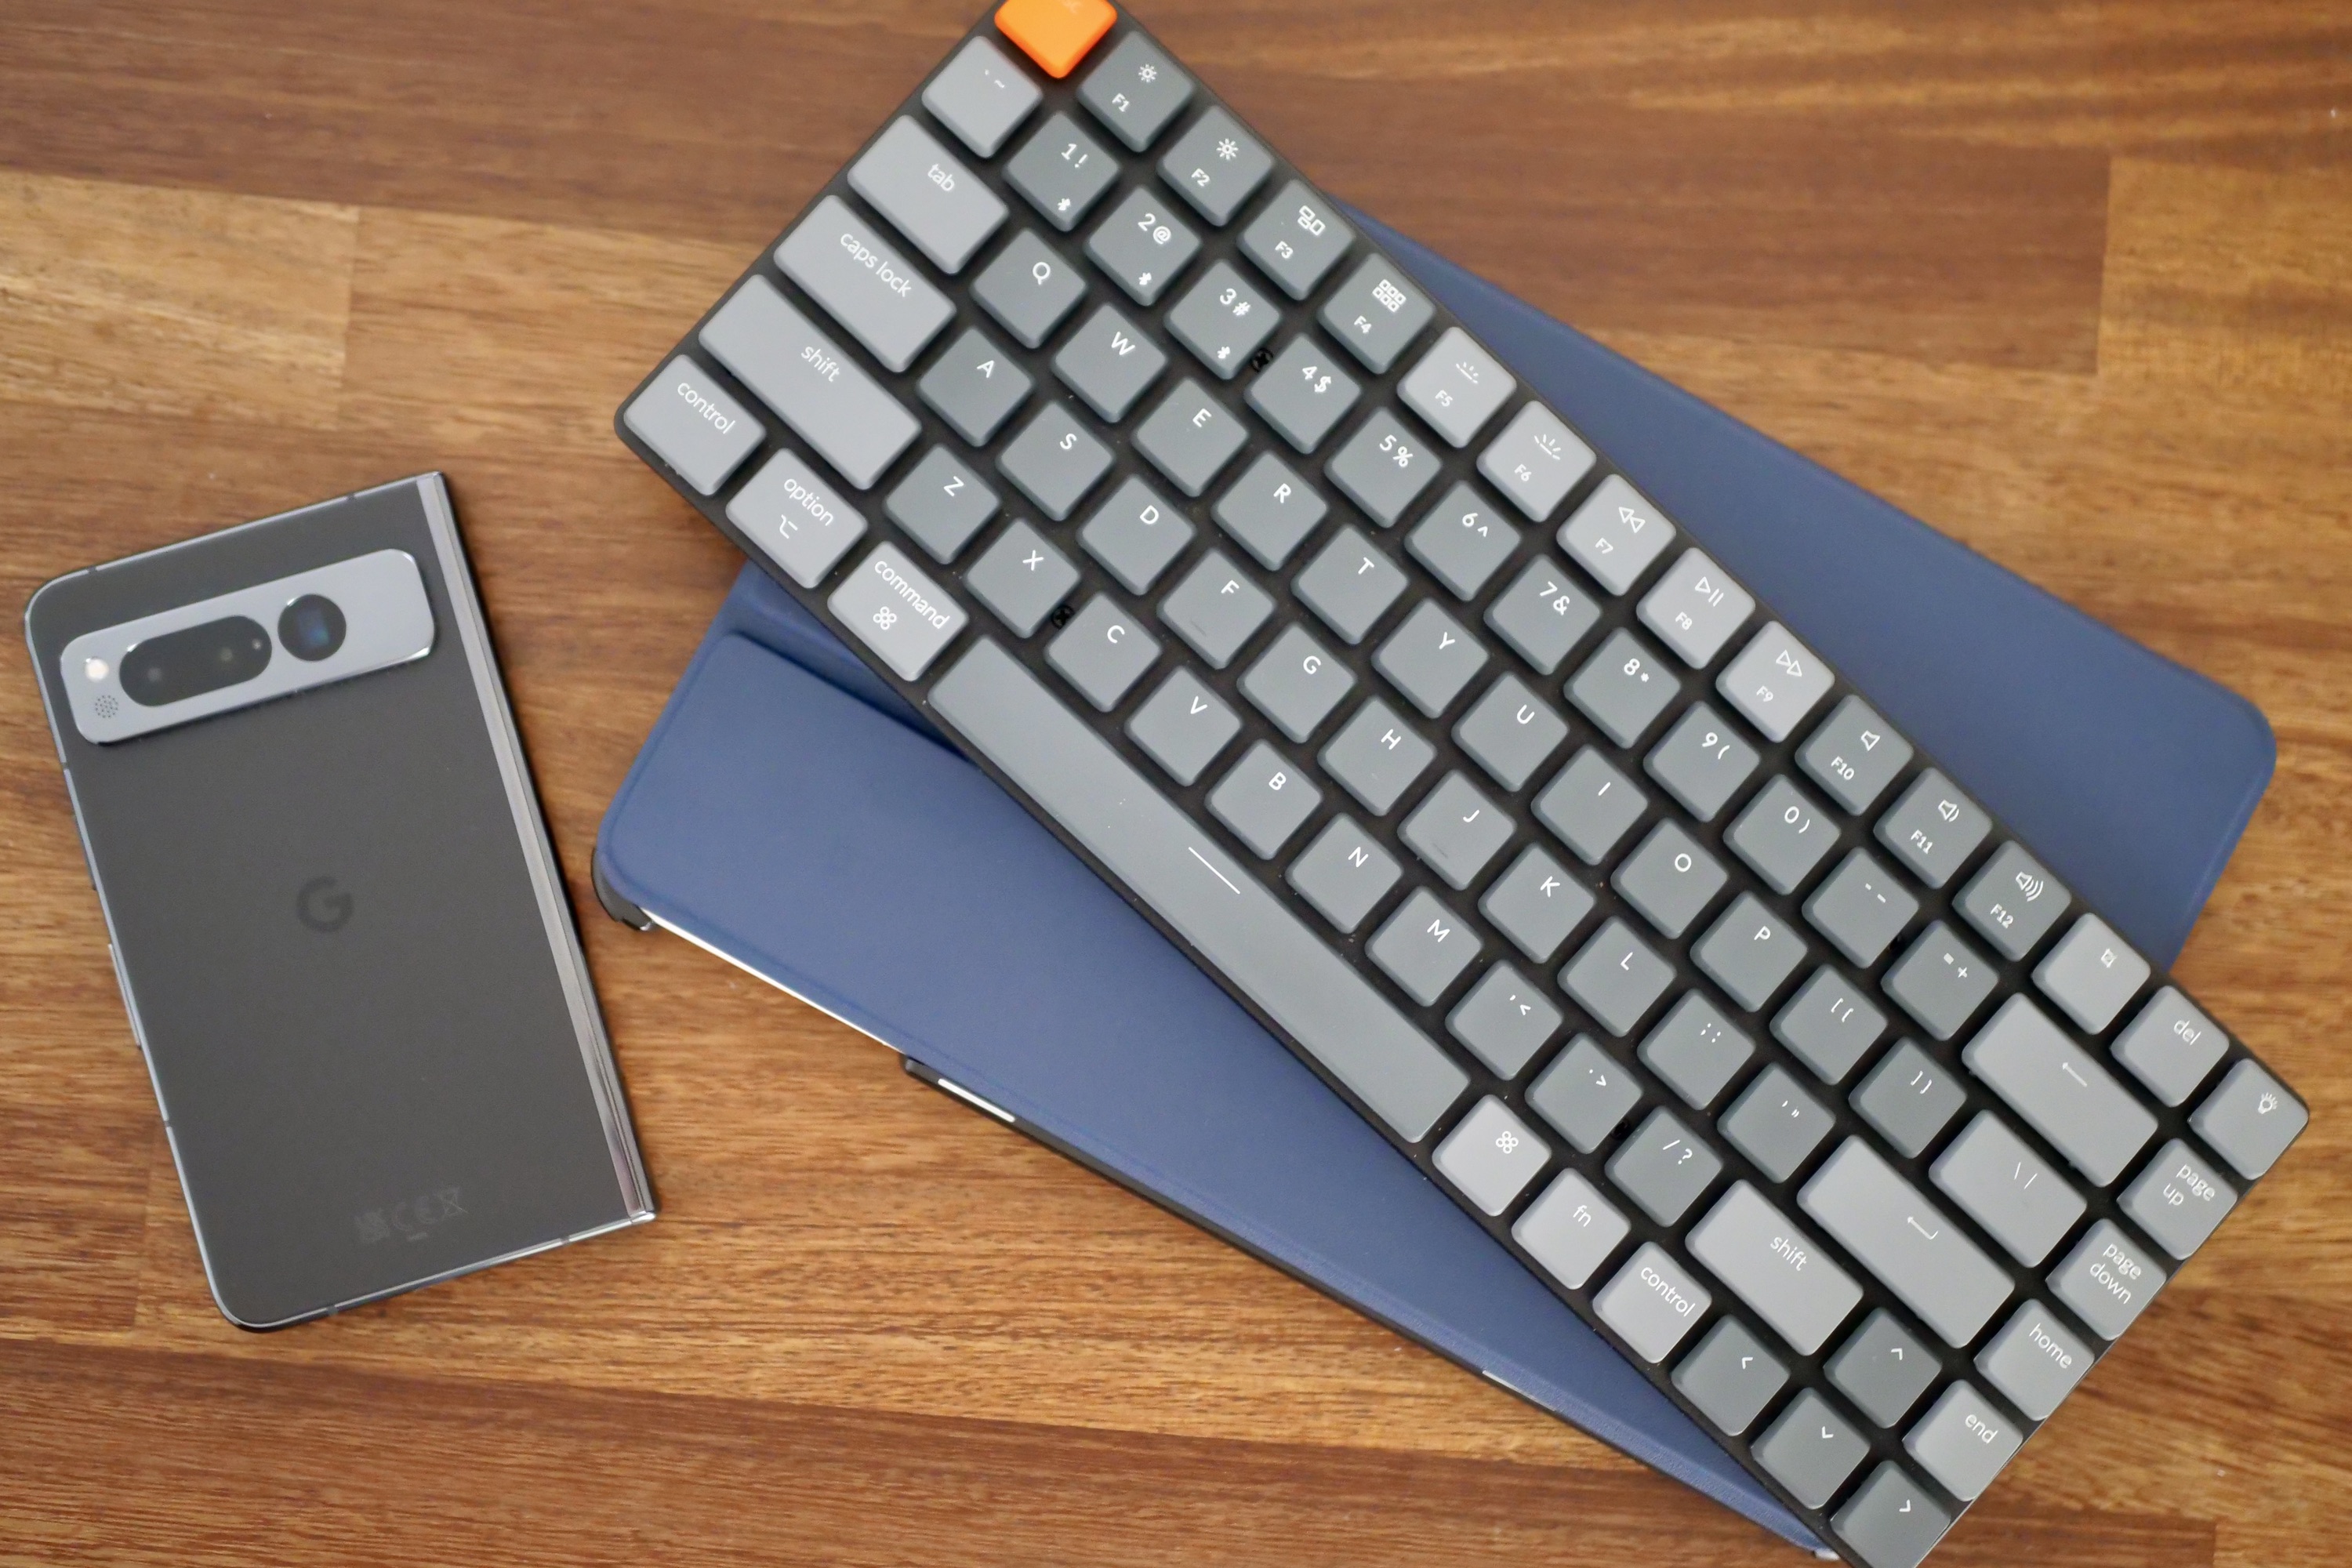 The Keychron K3 keyboard with the Pixel Tablet and Pixel Fold.